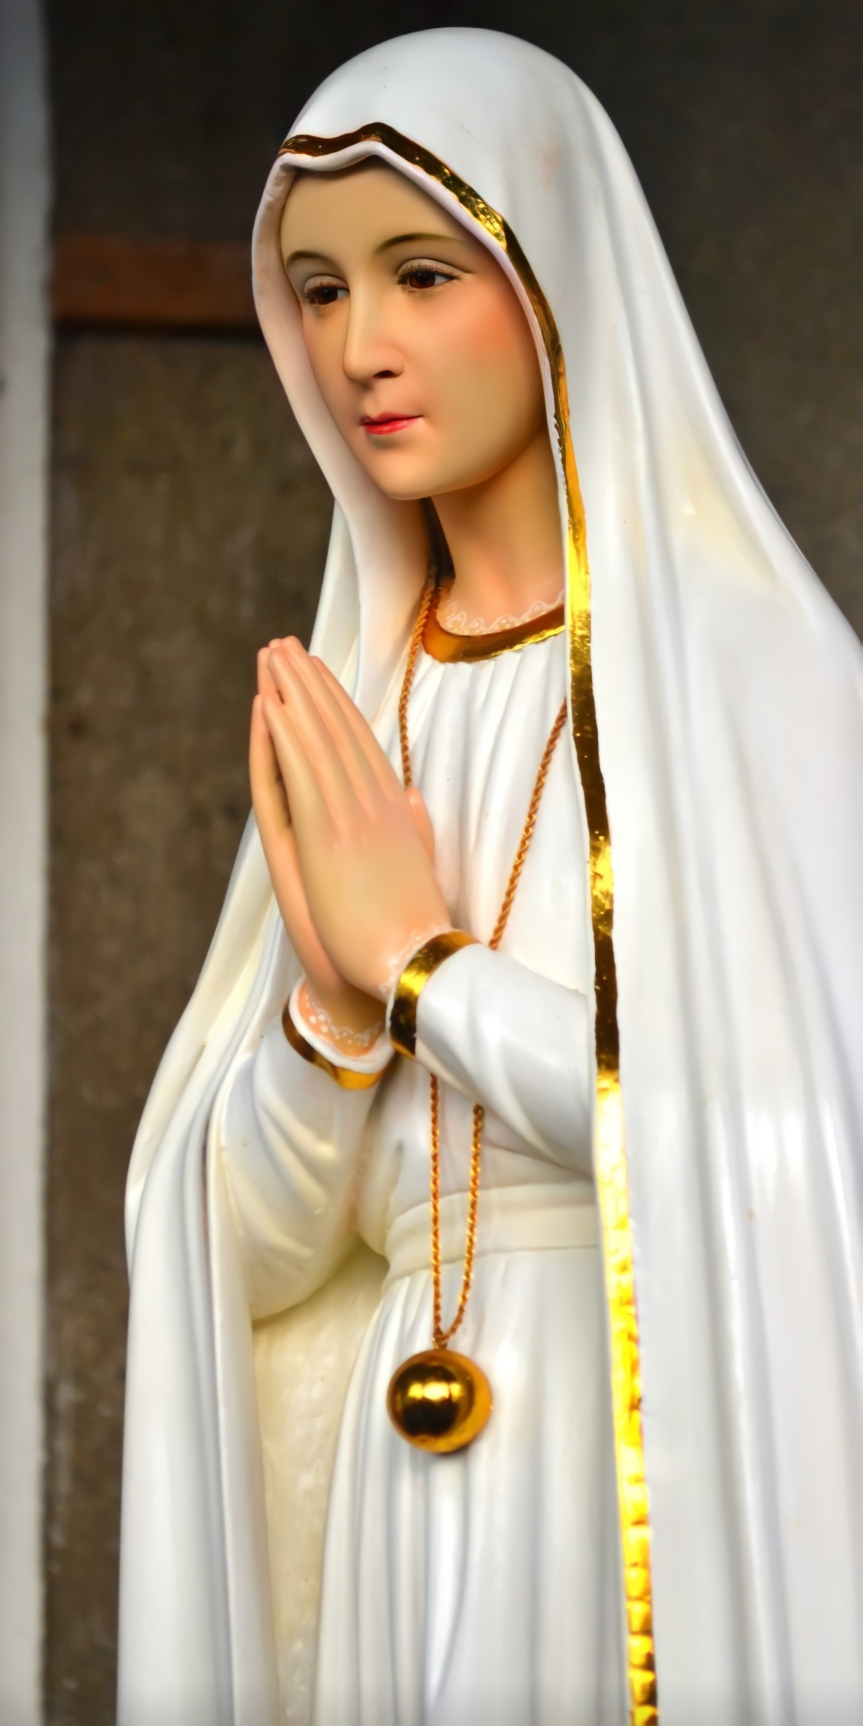 Our Lady of Fatima, Statue